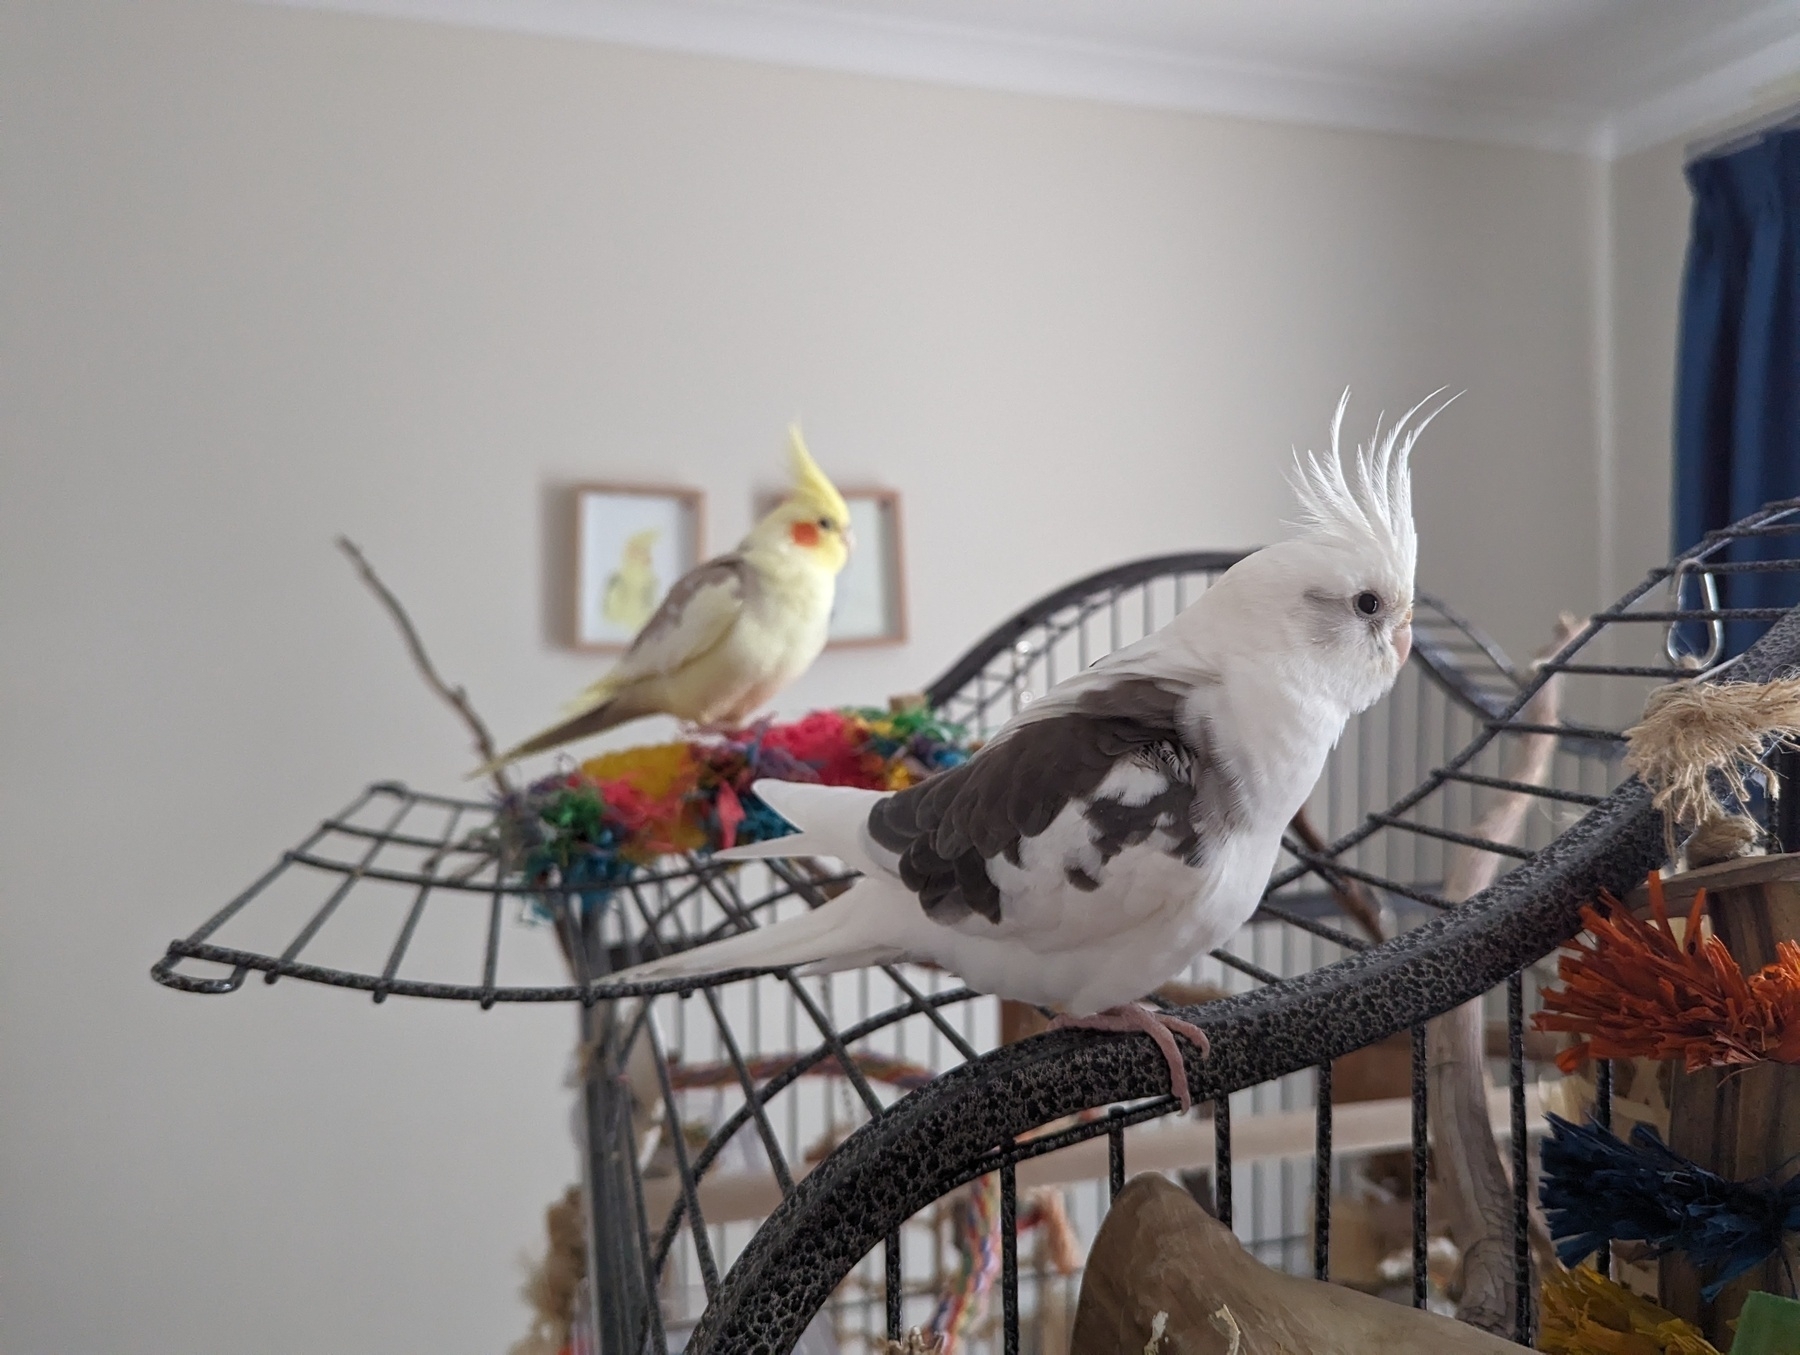 Two cockatiels, one white and the other yellow, perched on a cage in a room.